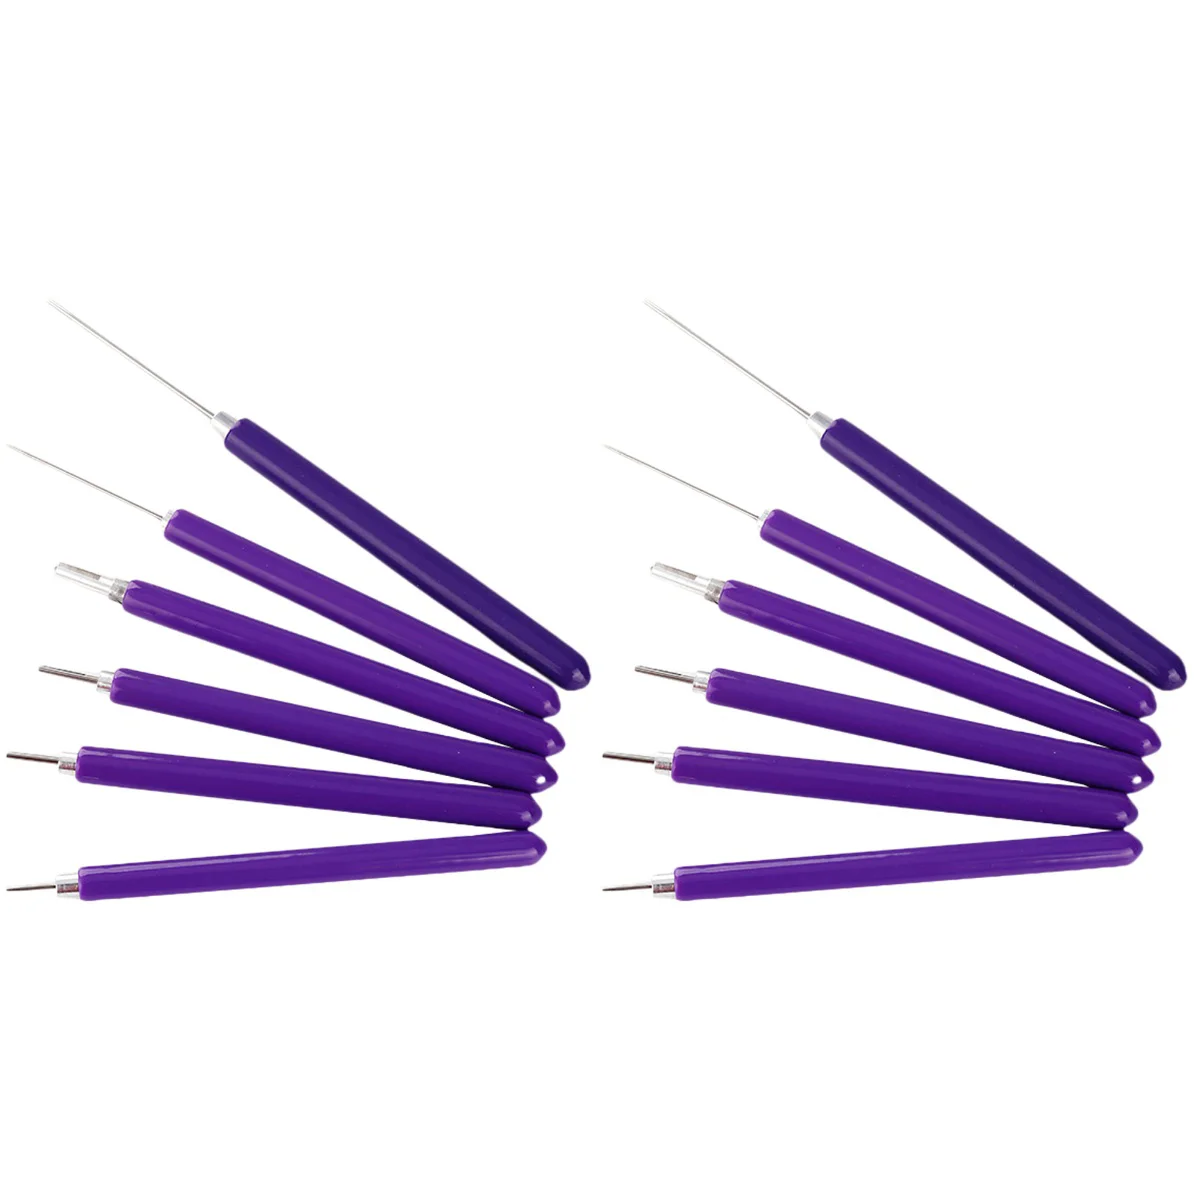 

2 Sets Quilting Supplies Paper Quilling Tool Pen DIY Kits 6 Piece 13x0.7cm Tools Purple Stainless Steel Home